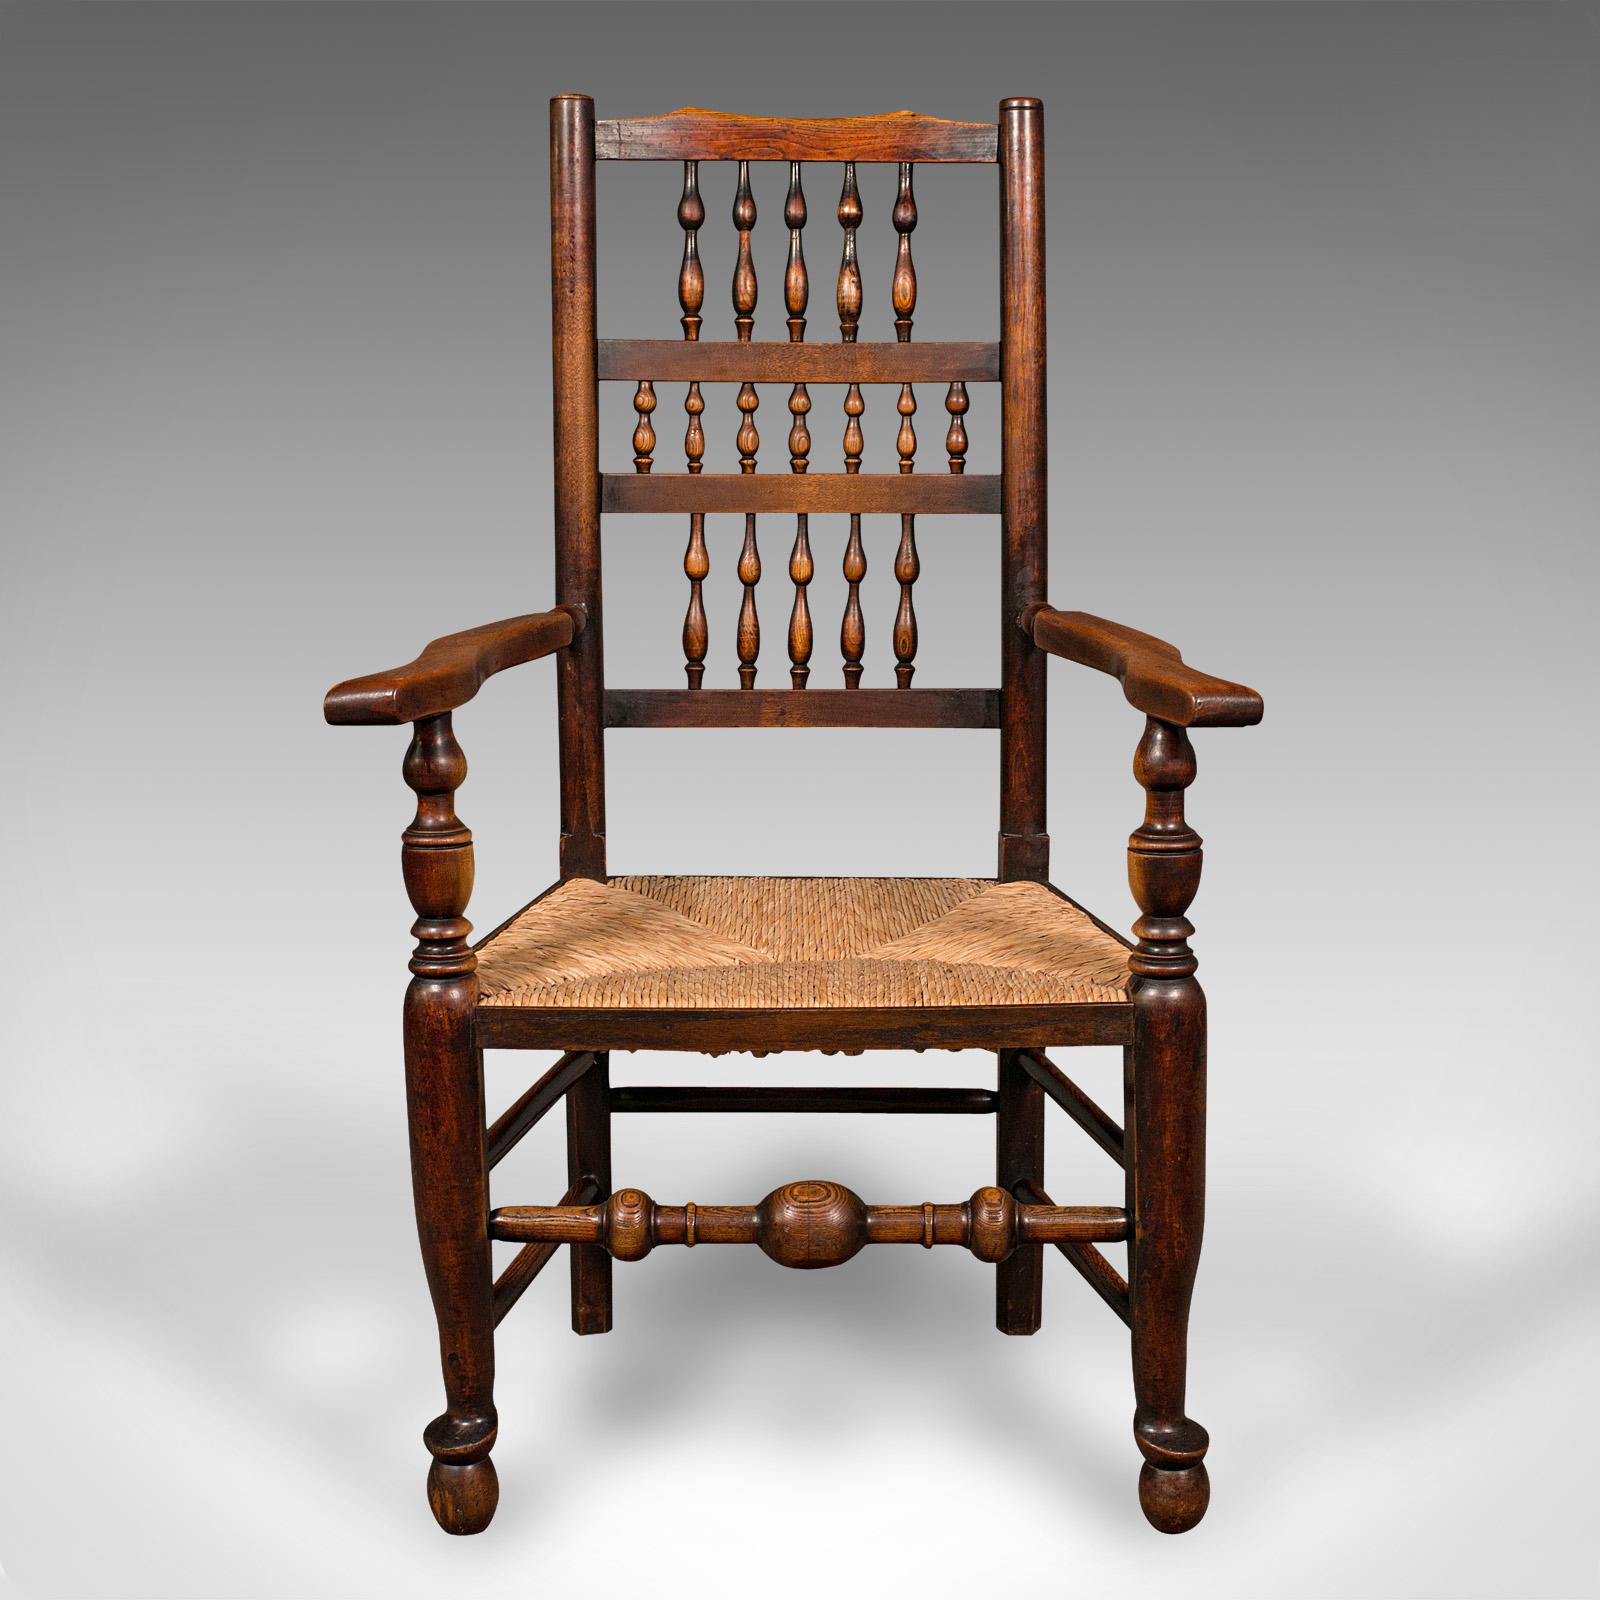 This is an antique Lancashire spindle back carver chair. An English oak and mahogany hallway elbow seat, dating to the early Victorian period, circa 1850.

Wonderfully traditional Lancashire taste with fine rush seat
Displays a desirable aged